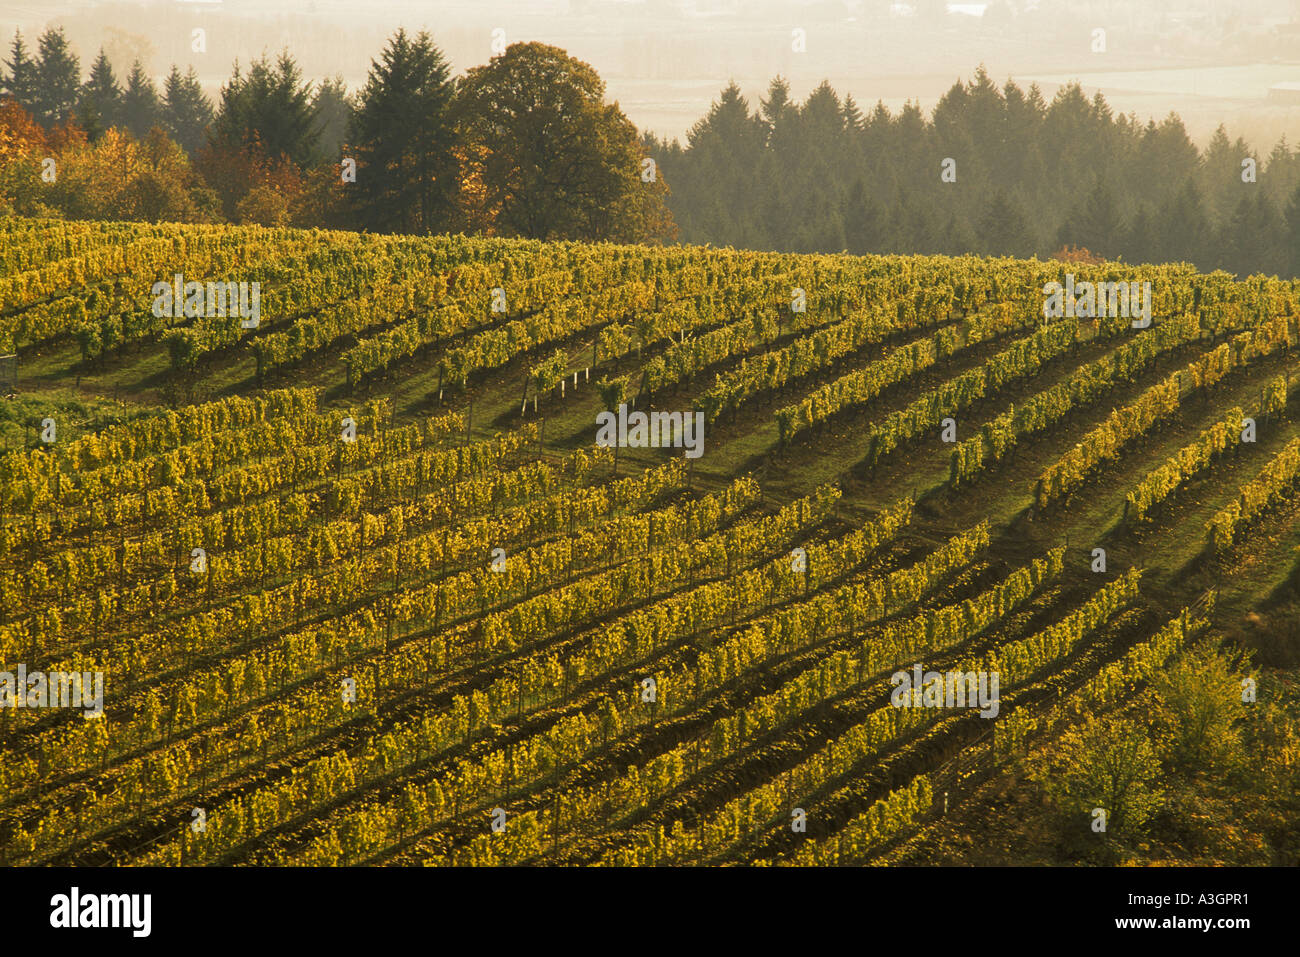 Rows of grape vines on hillside at David Hill Vineyards and Winery Forest Grove Oregon Stock Photo